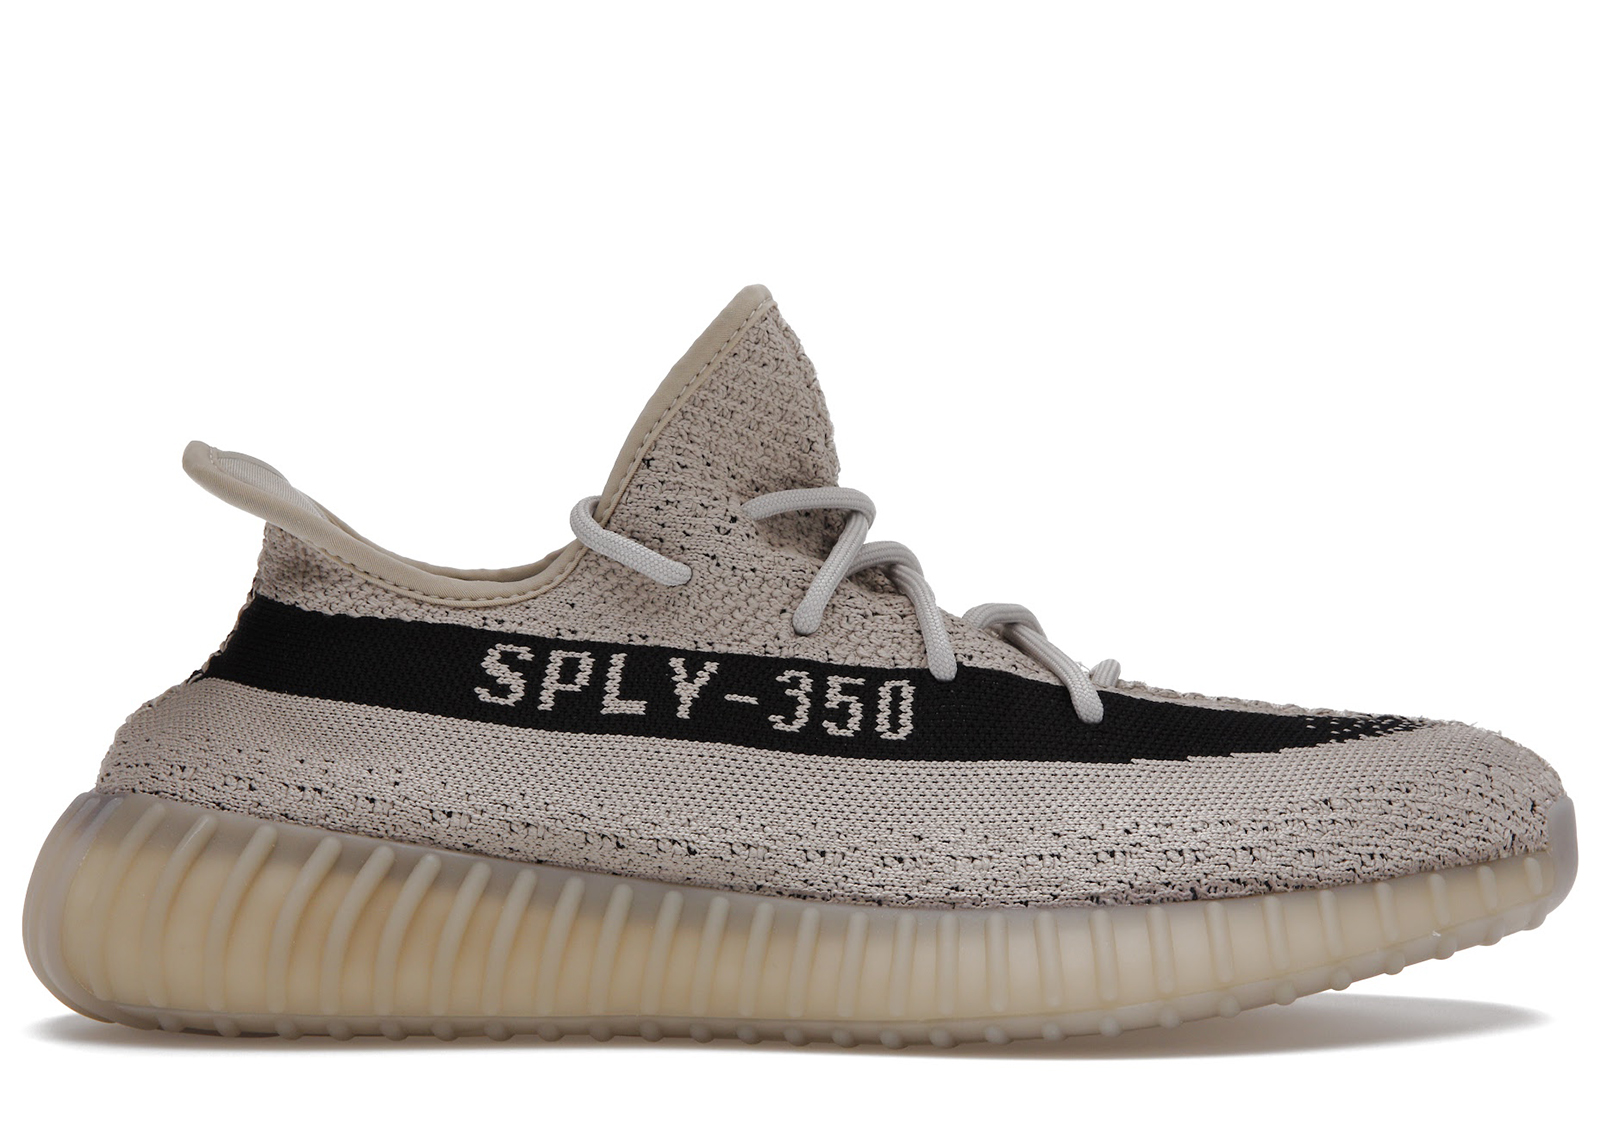 Buy Yeezy 350 v2 Shoes & New Sneakers - StockX